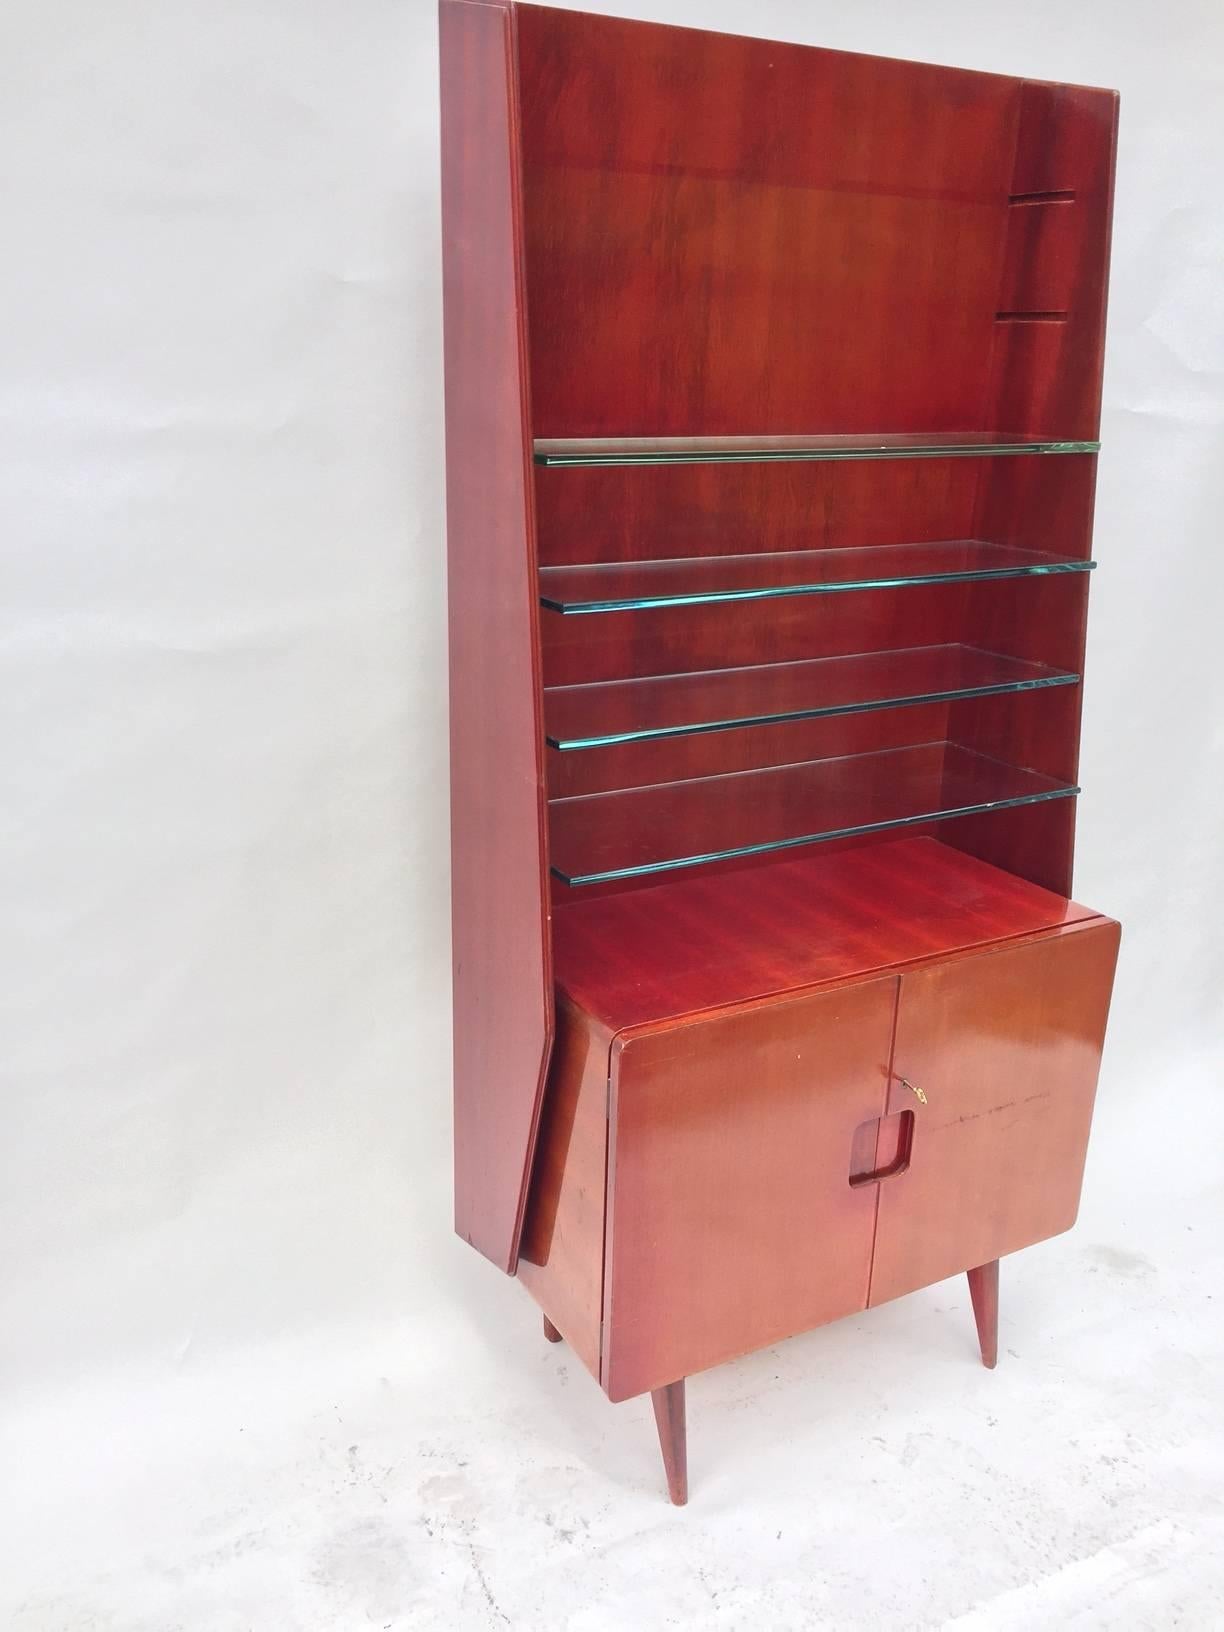  Display cabinet in polished red mahogany with six thick glass shelves and storage on the bottom by Vittorio Valabrega, Italian, 1950s. (Only one is available) 